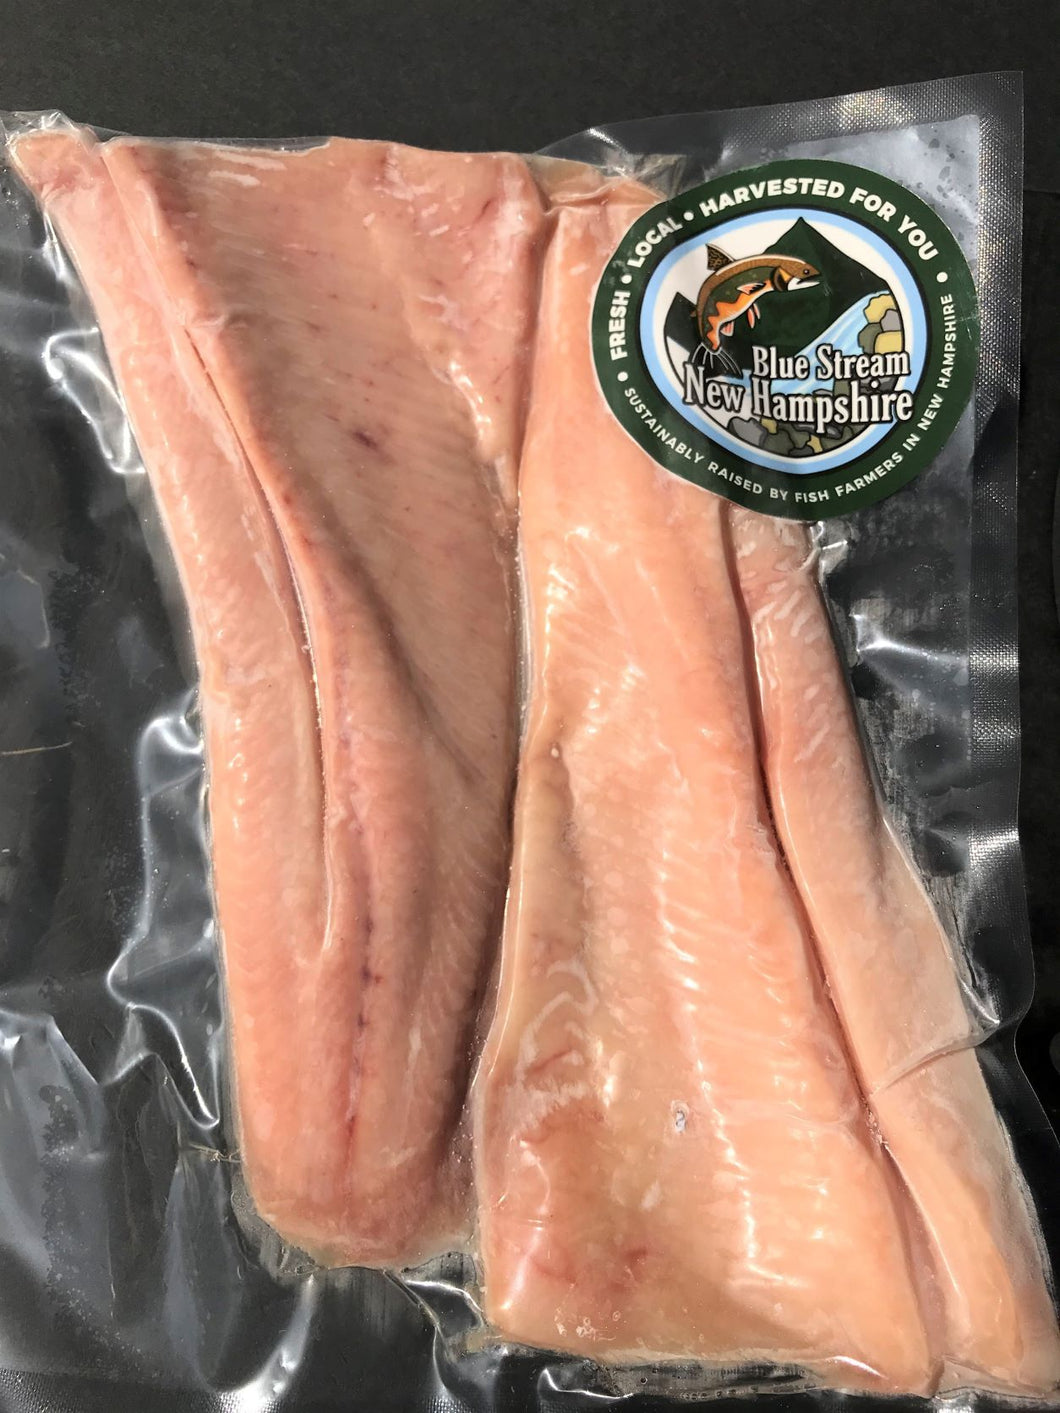 The Rainbow Trout Fillet Stock Up Box